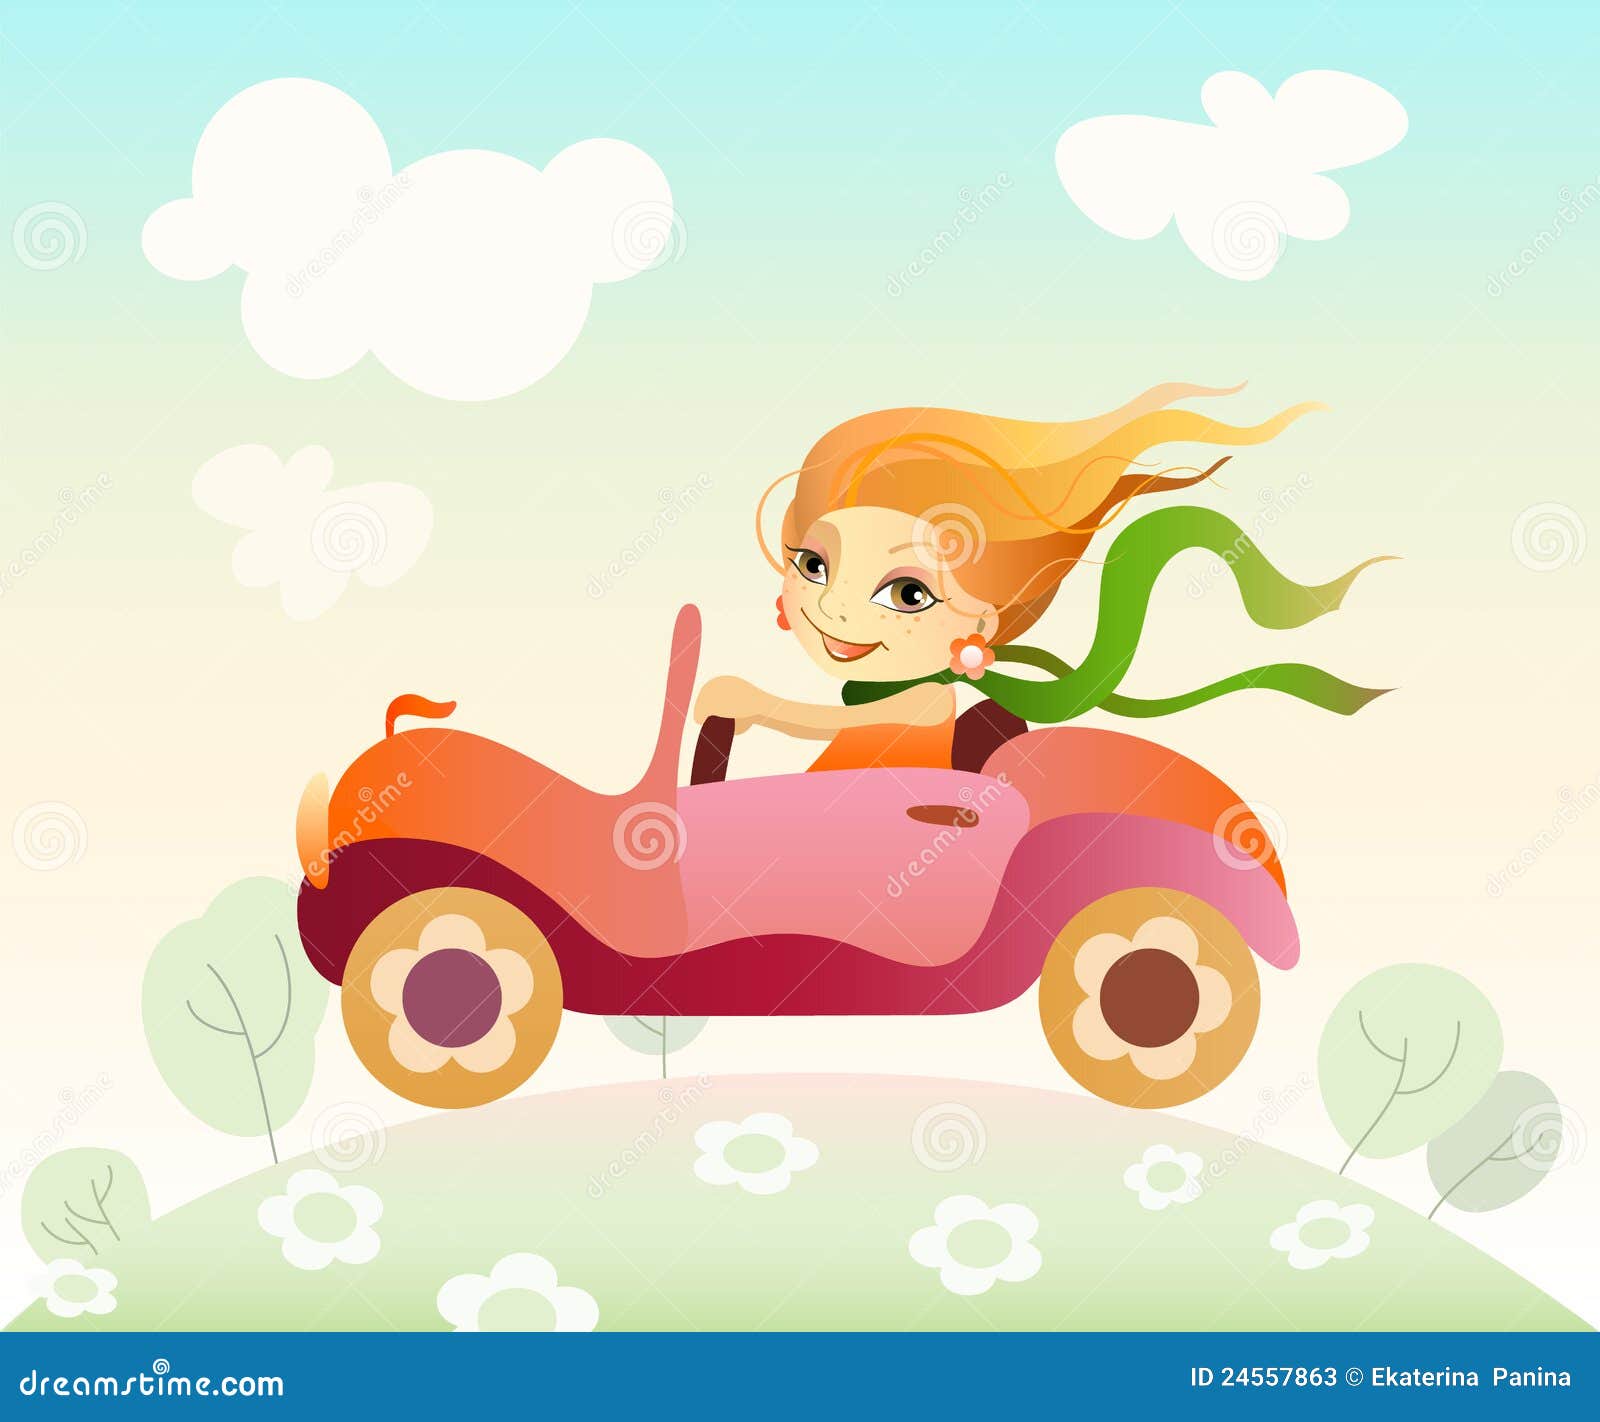 clipart of girl driving car - photo #6